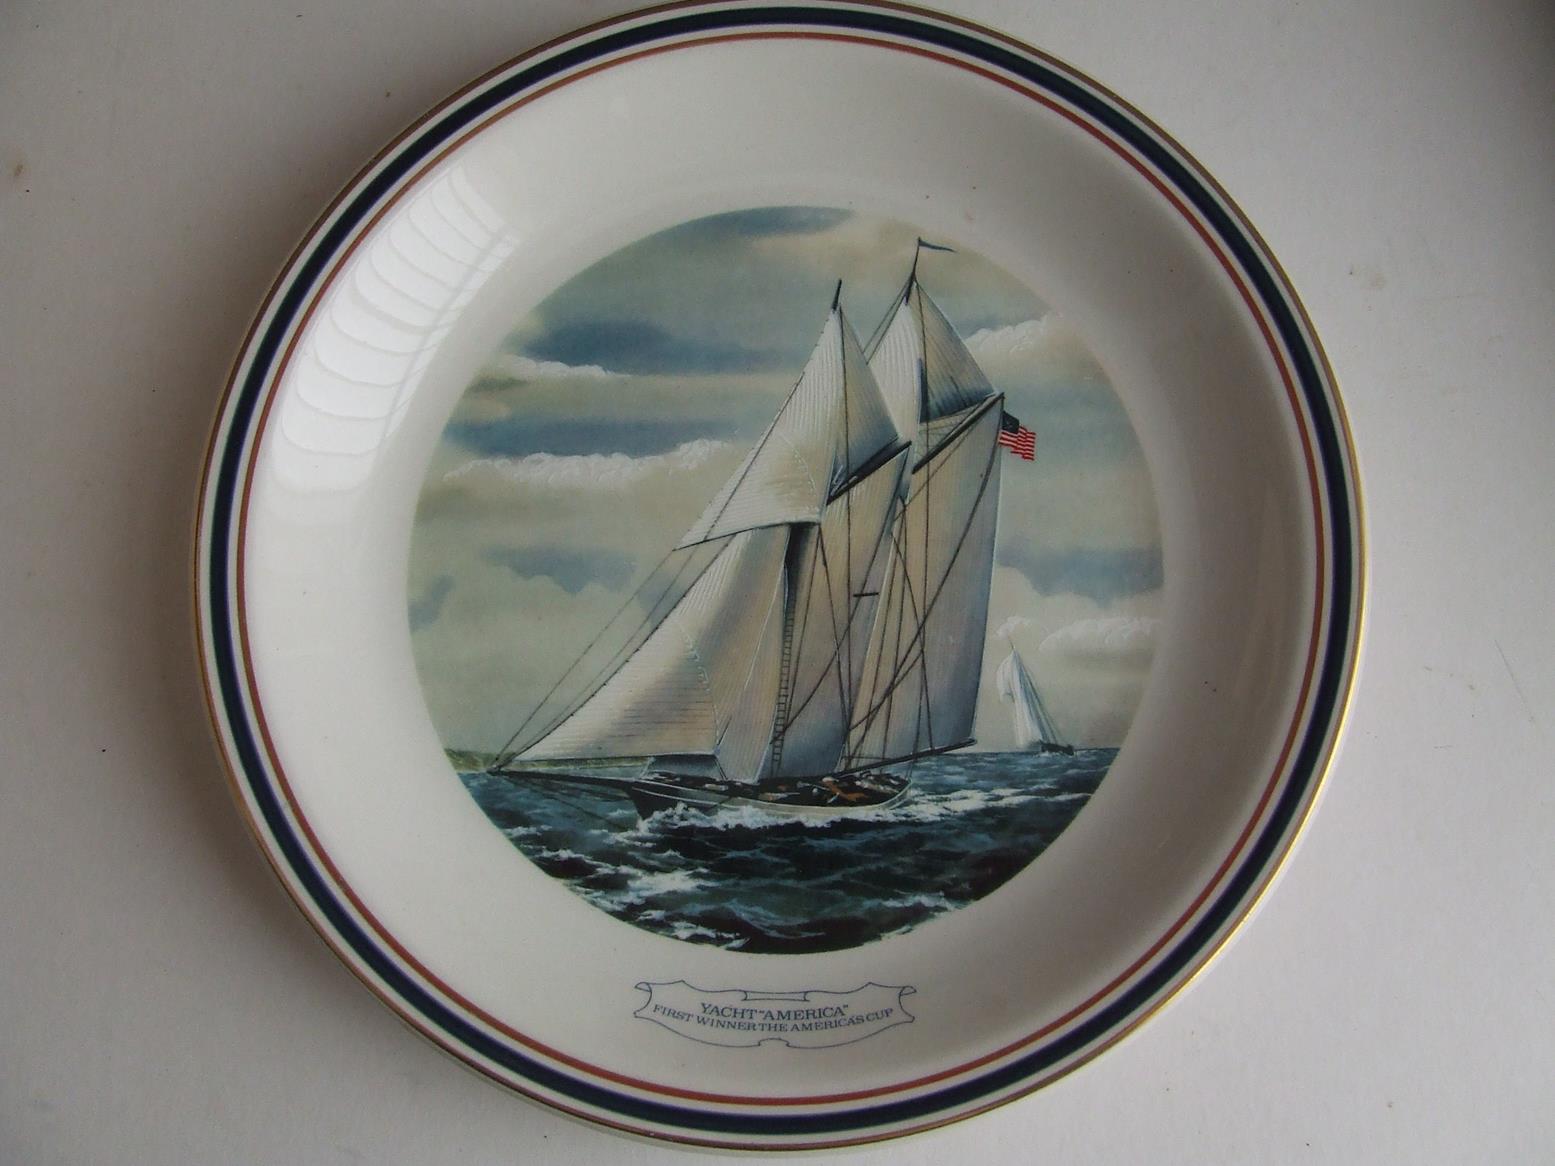 New York Yacht Club Official America's Cup Collector Plate